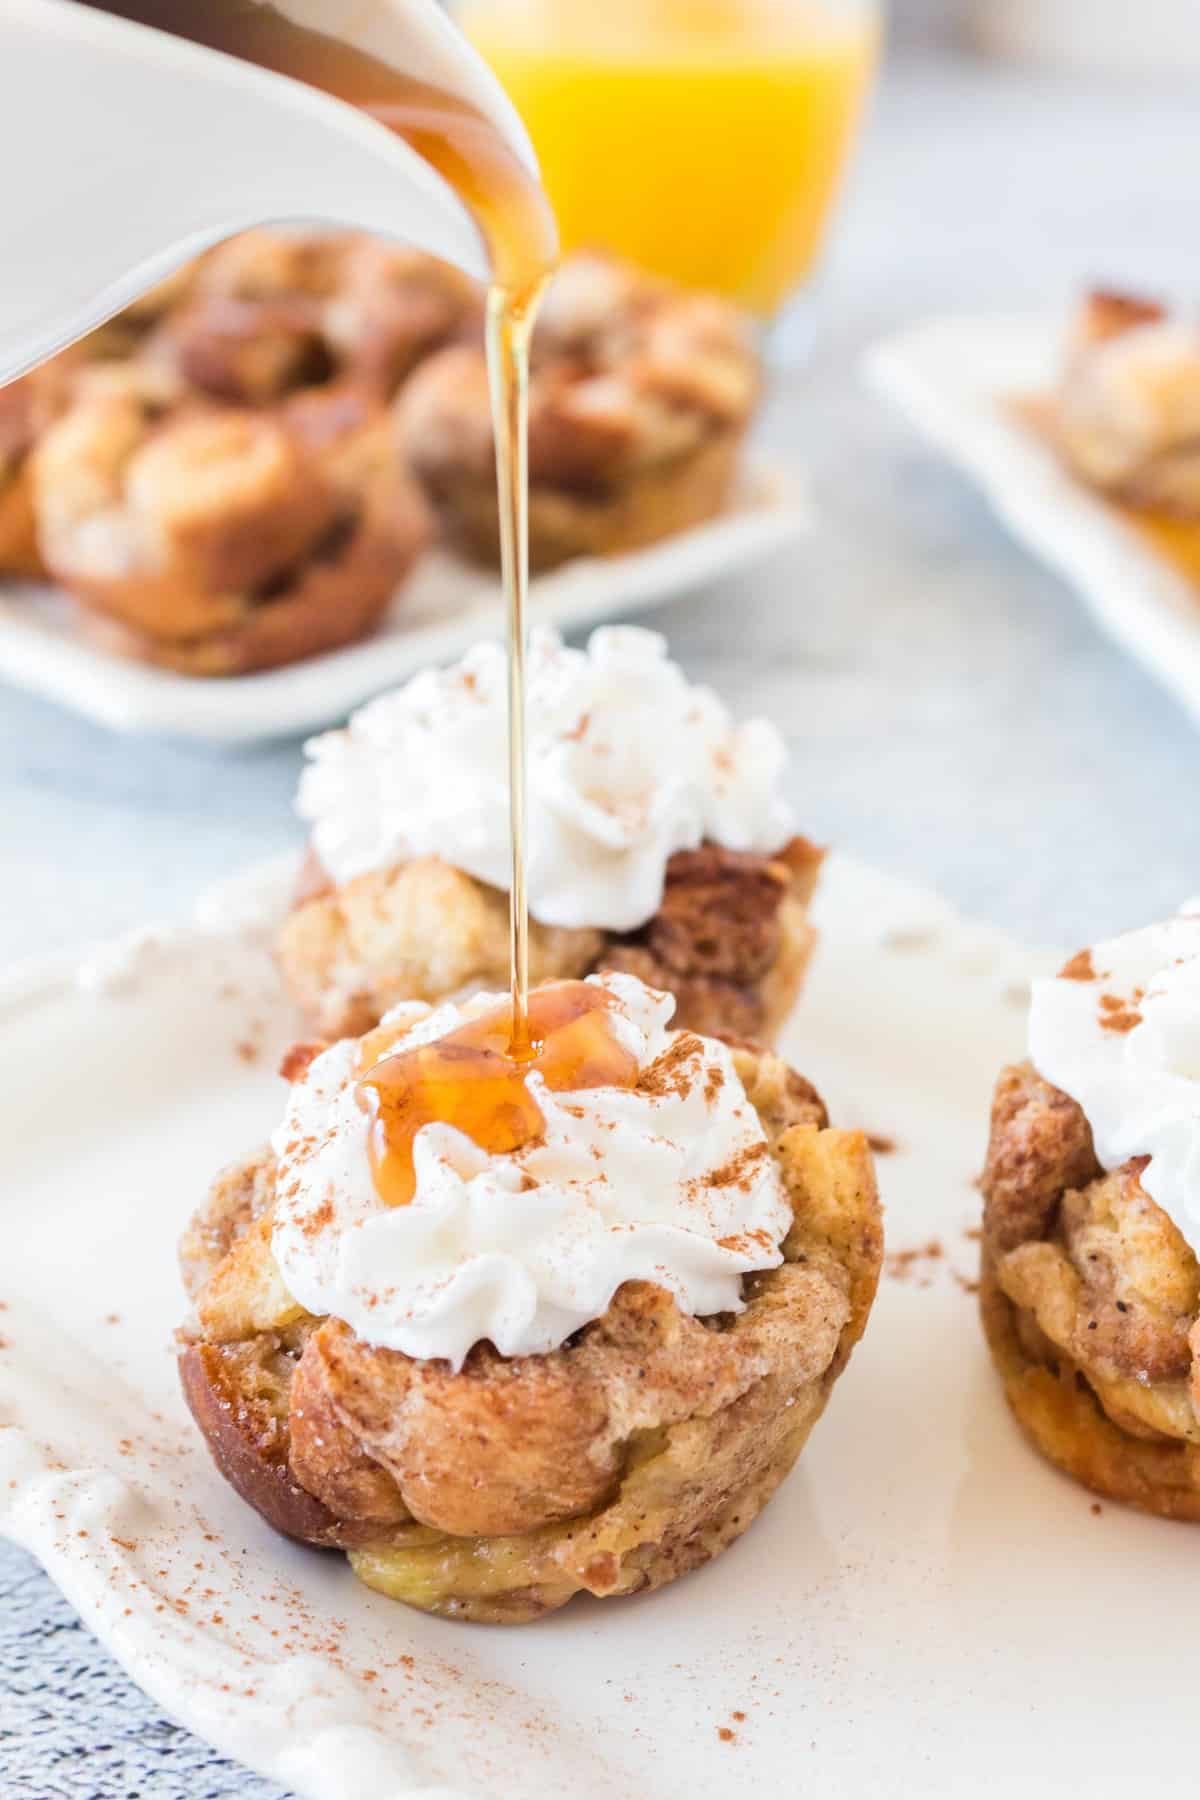 Syrup being poured on a whipped cream topped french toast muffin.